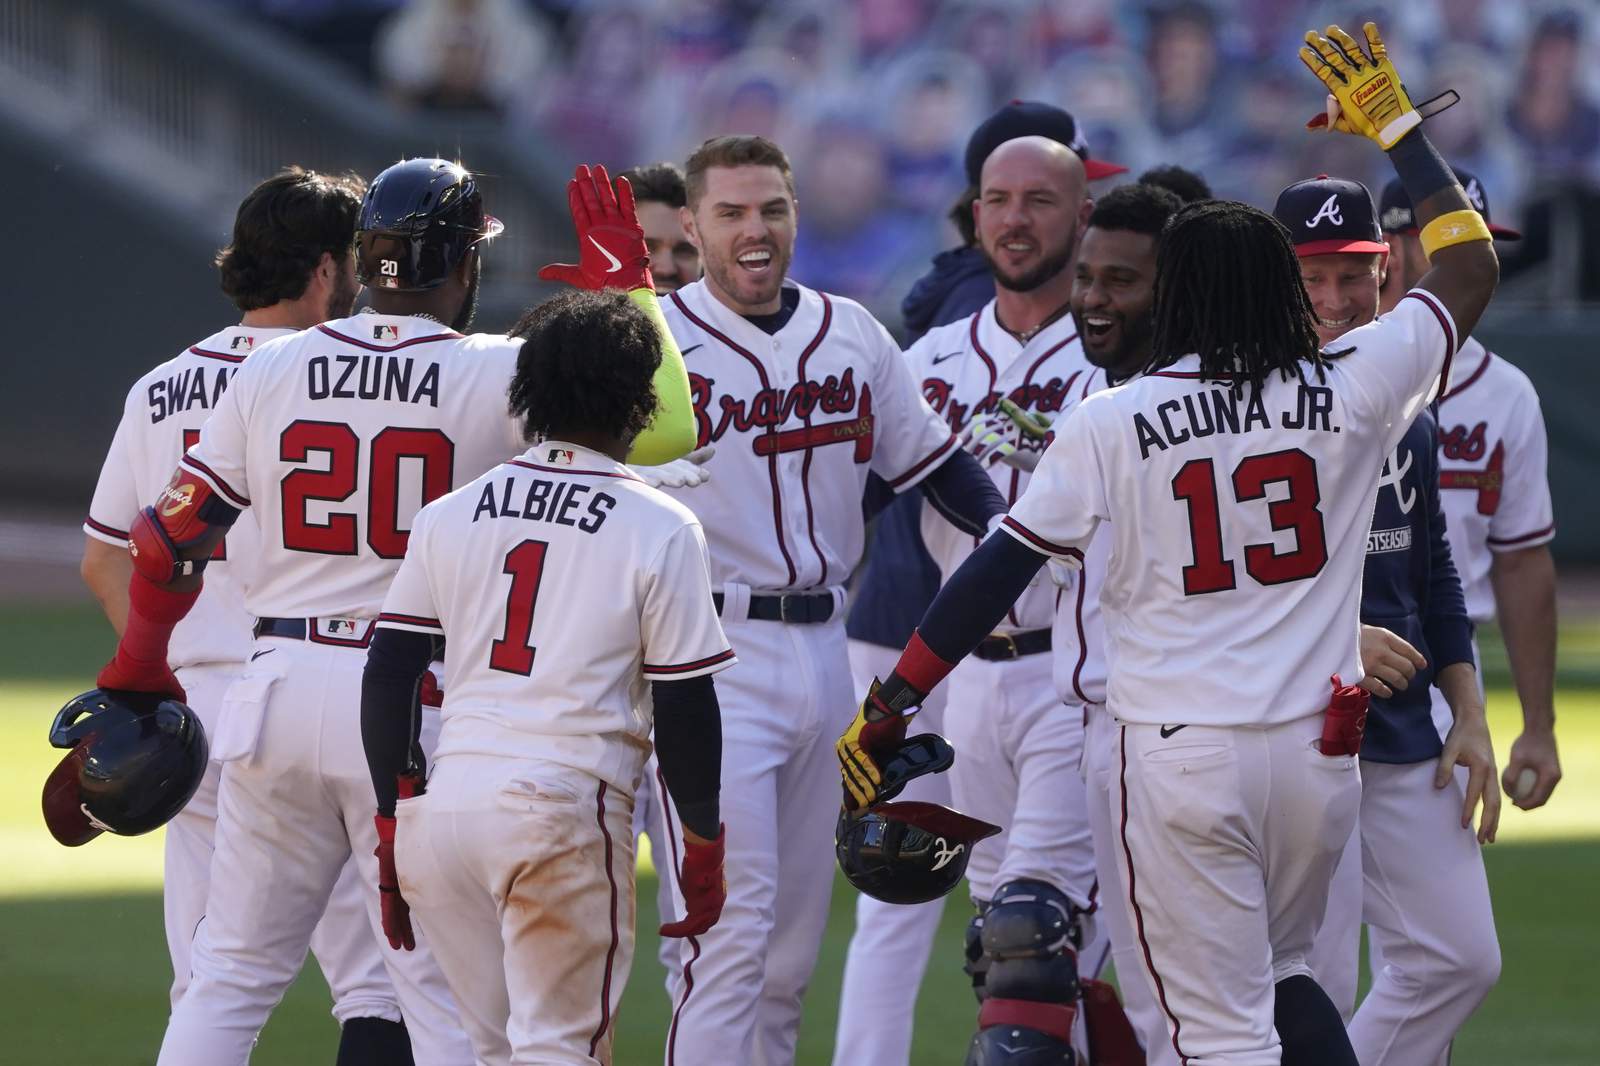 Finally! Freeman, Braves top Reds 1-0 in 13th to open series